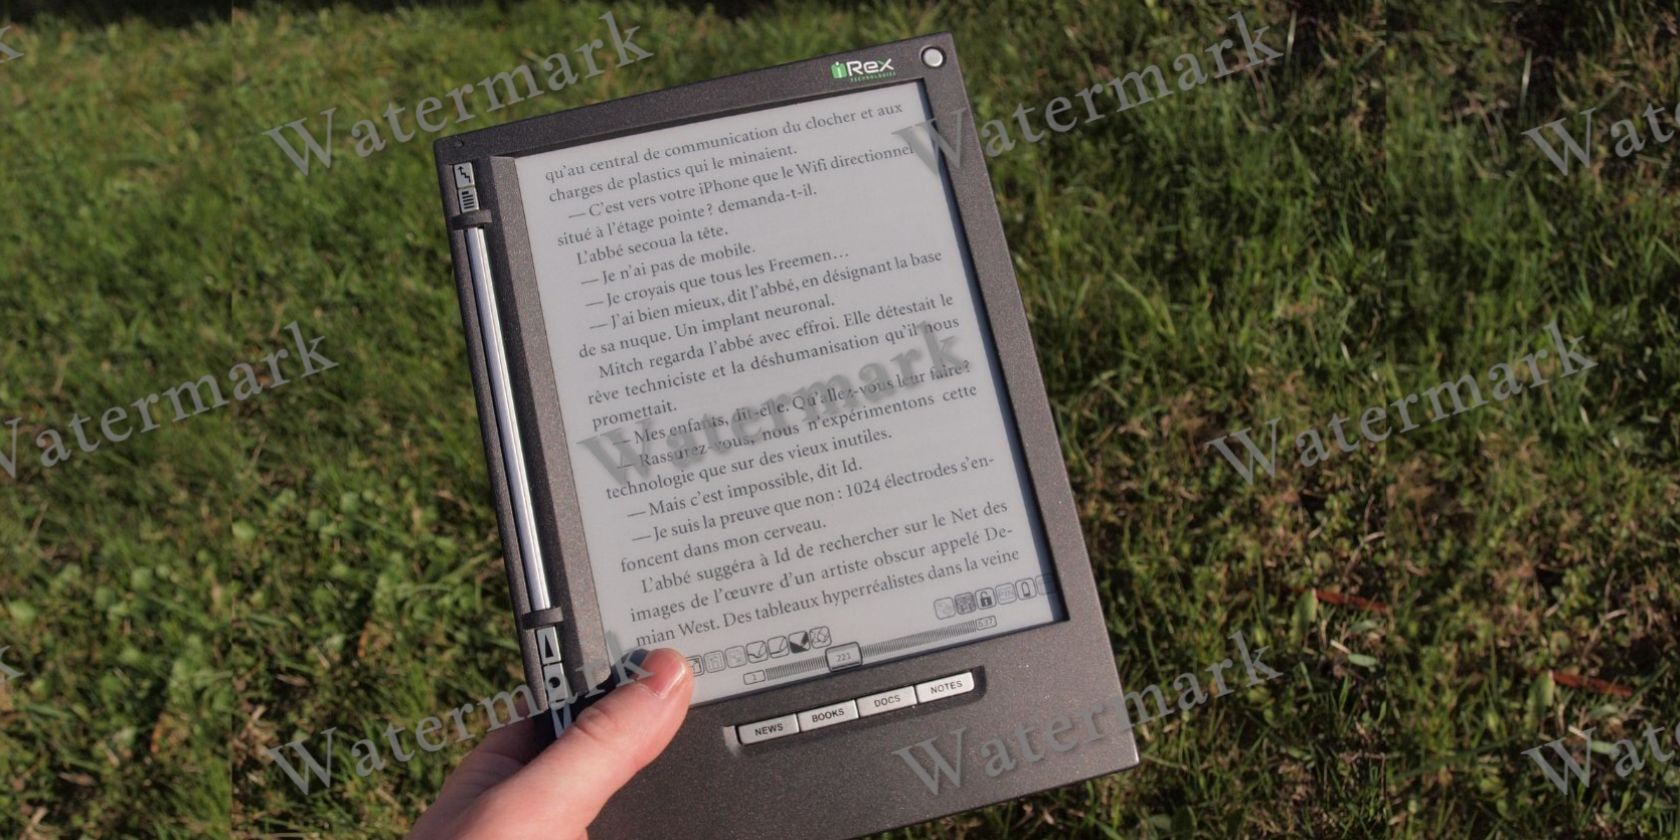 Watermark image of a document displayed on an e-reader